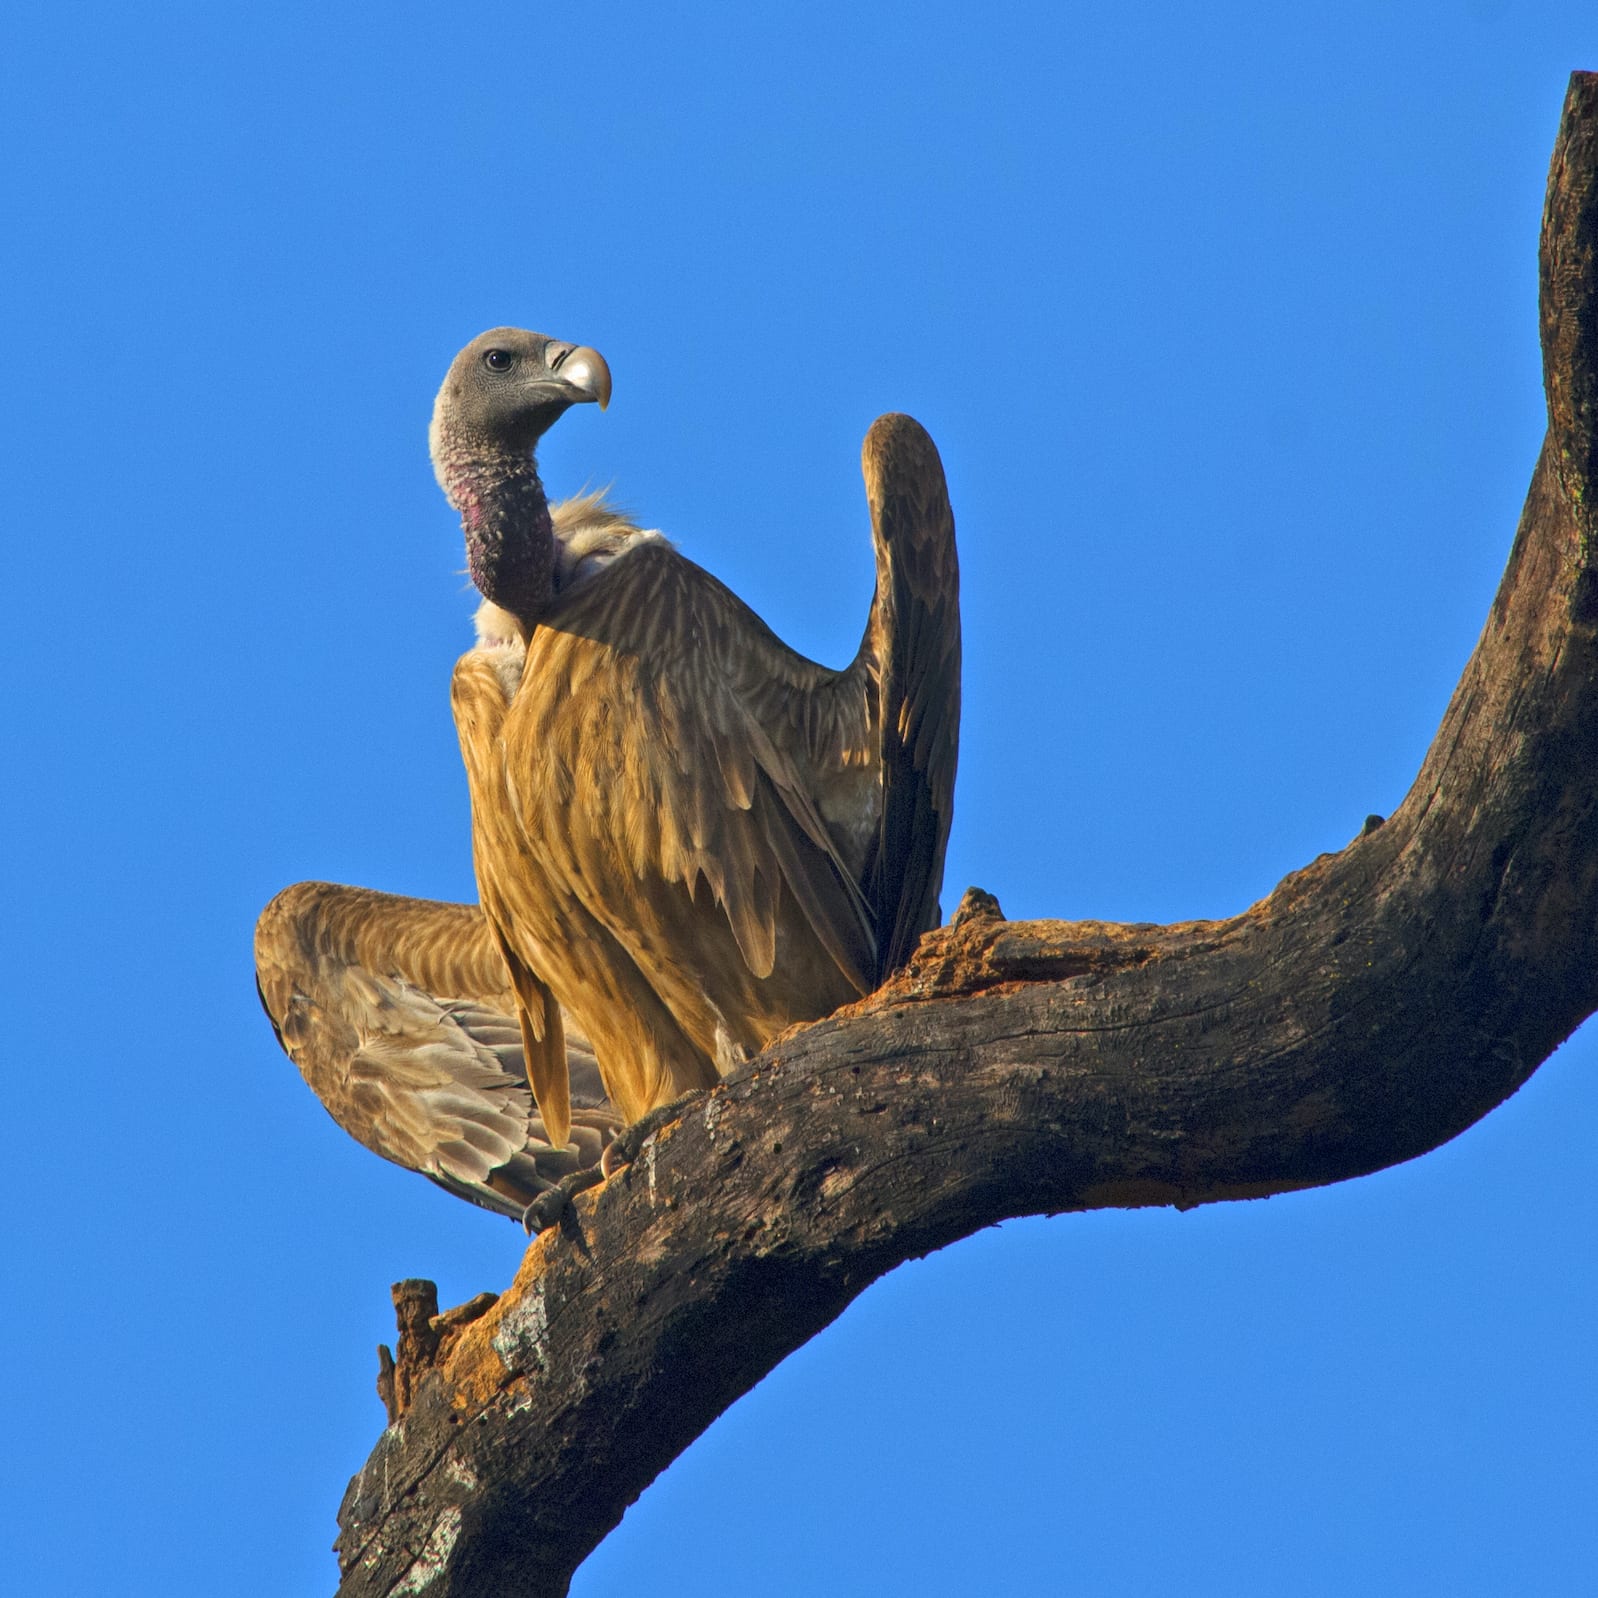 Image of Indian Vulture